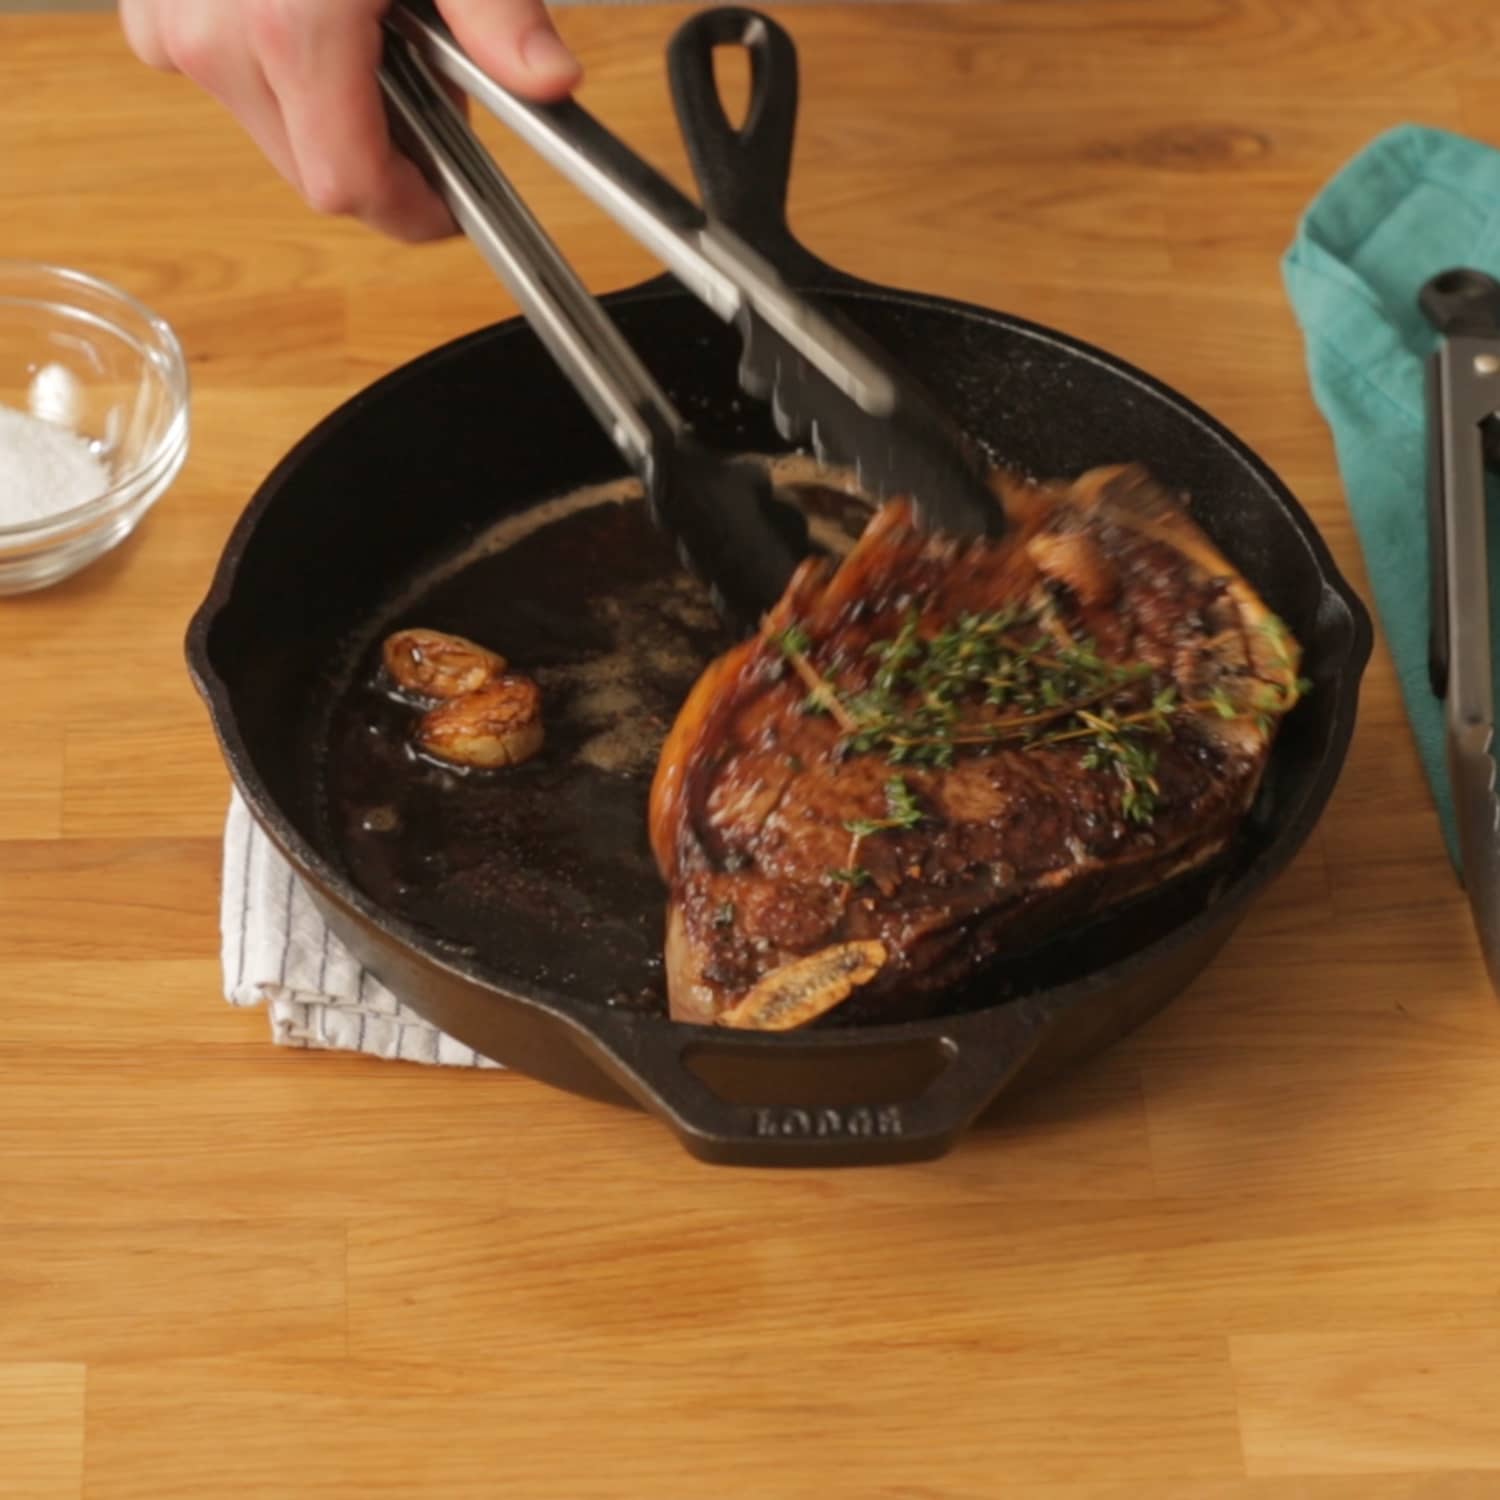 How to Clean a Greasy, Dirty Skillet